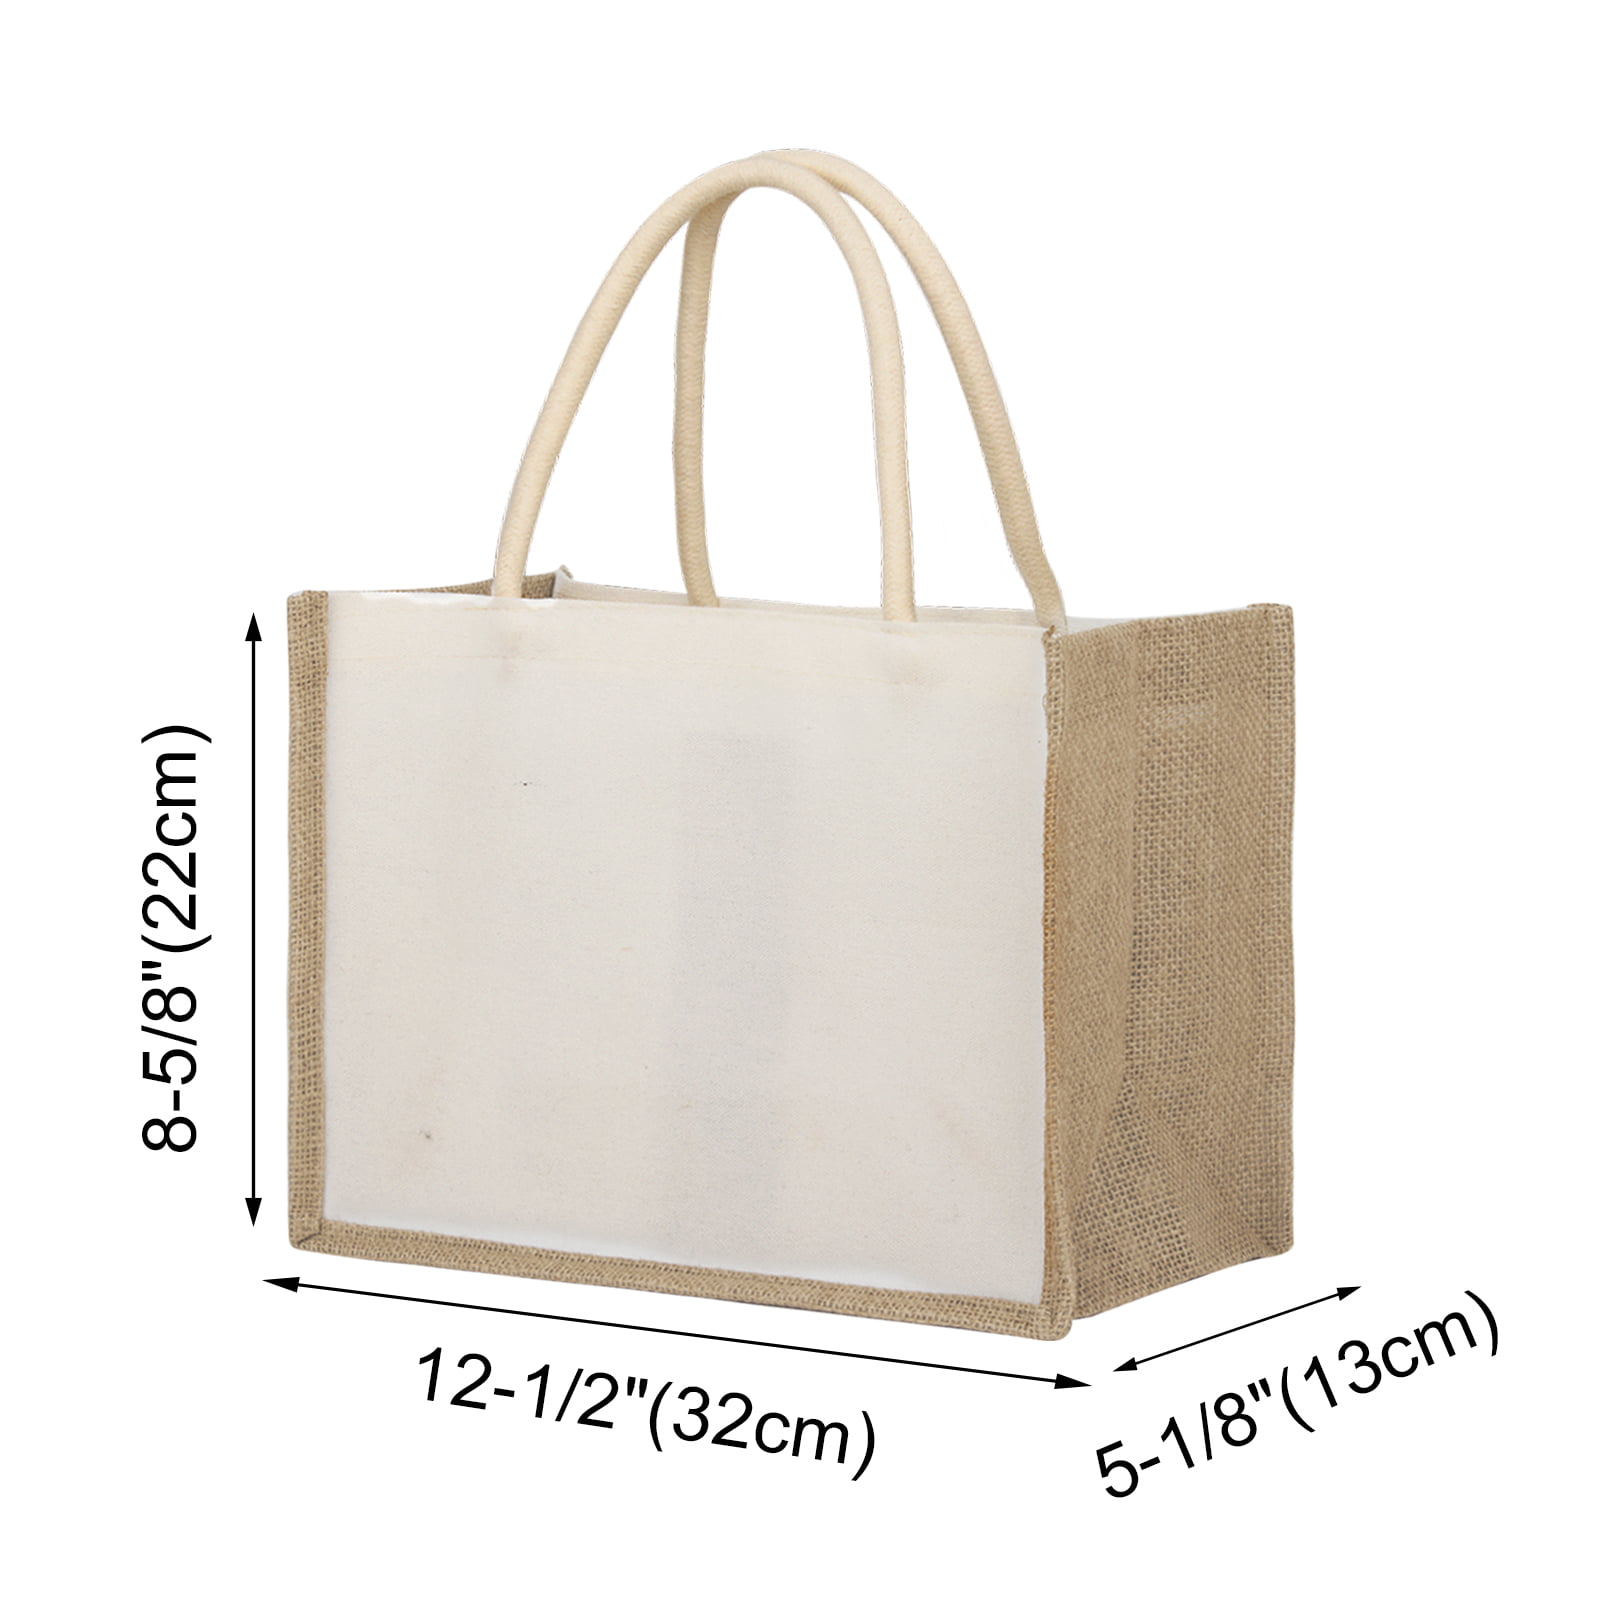  Sweetude 6 Pieces Extra Large Canvas Tote Bag Utility